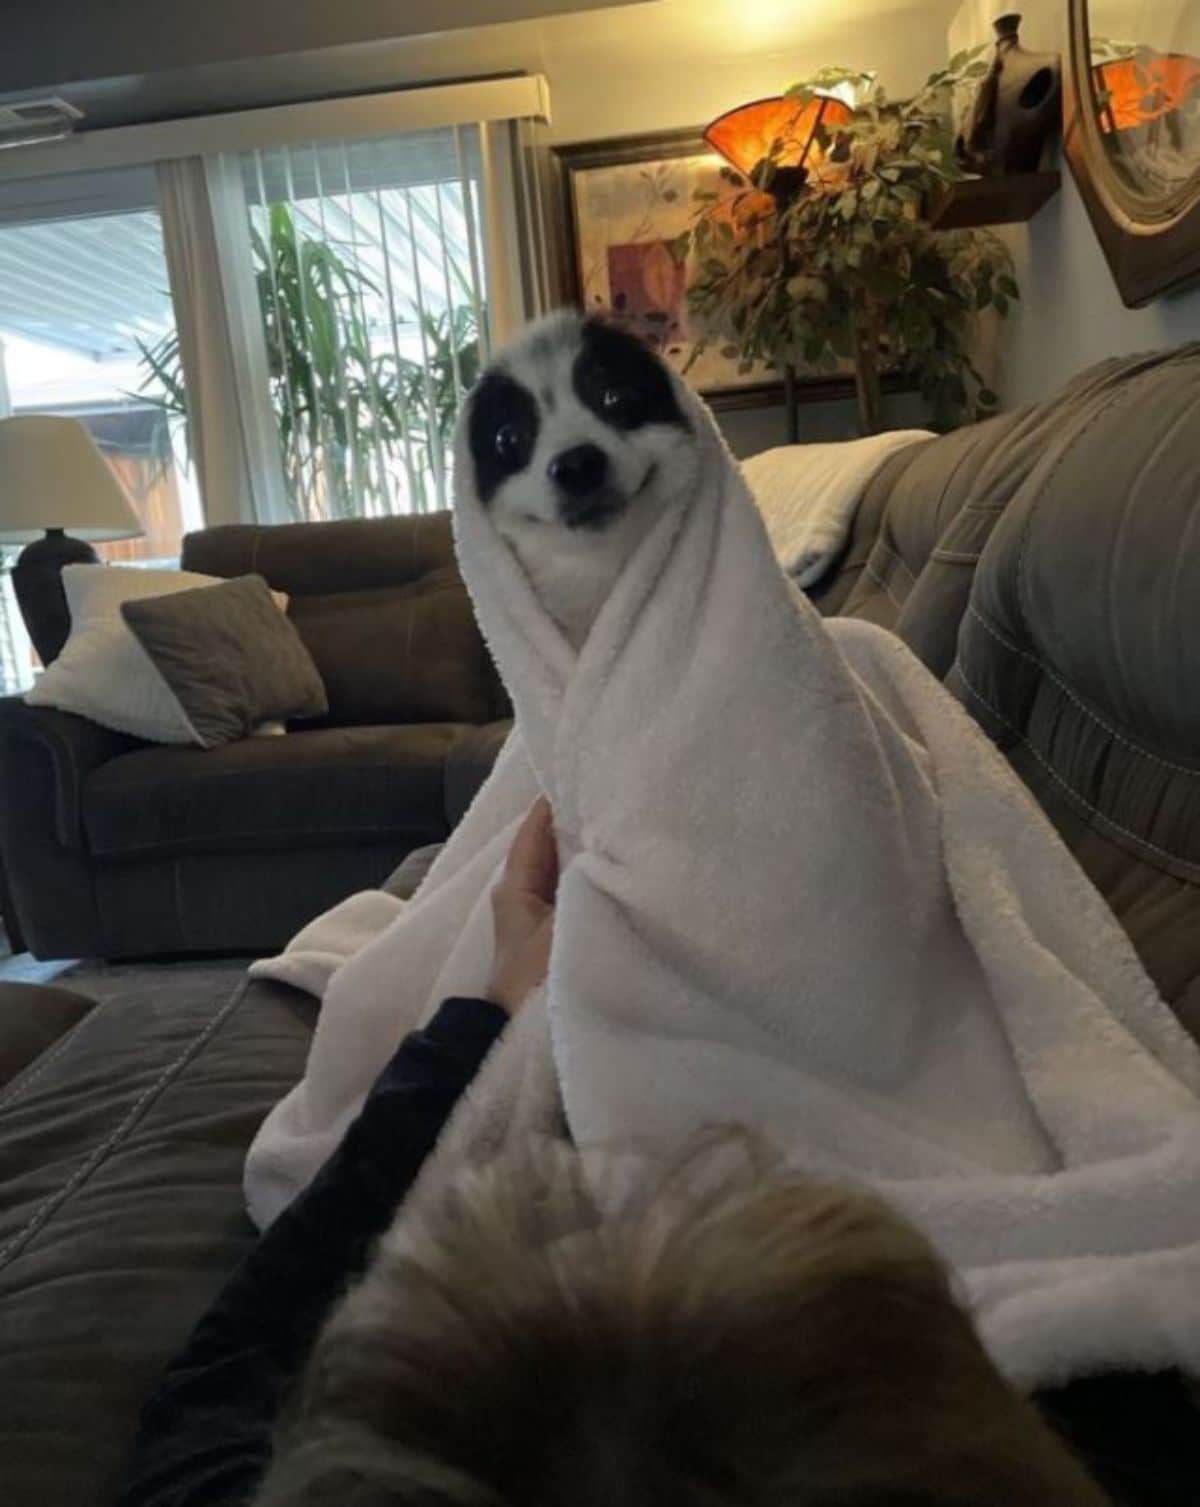 black and white dog who looks like he's smiling sitting on a grey sofa wrapped up in a white towel with someone holding the towel together